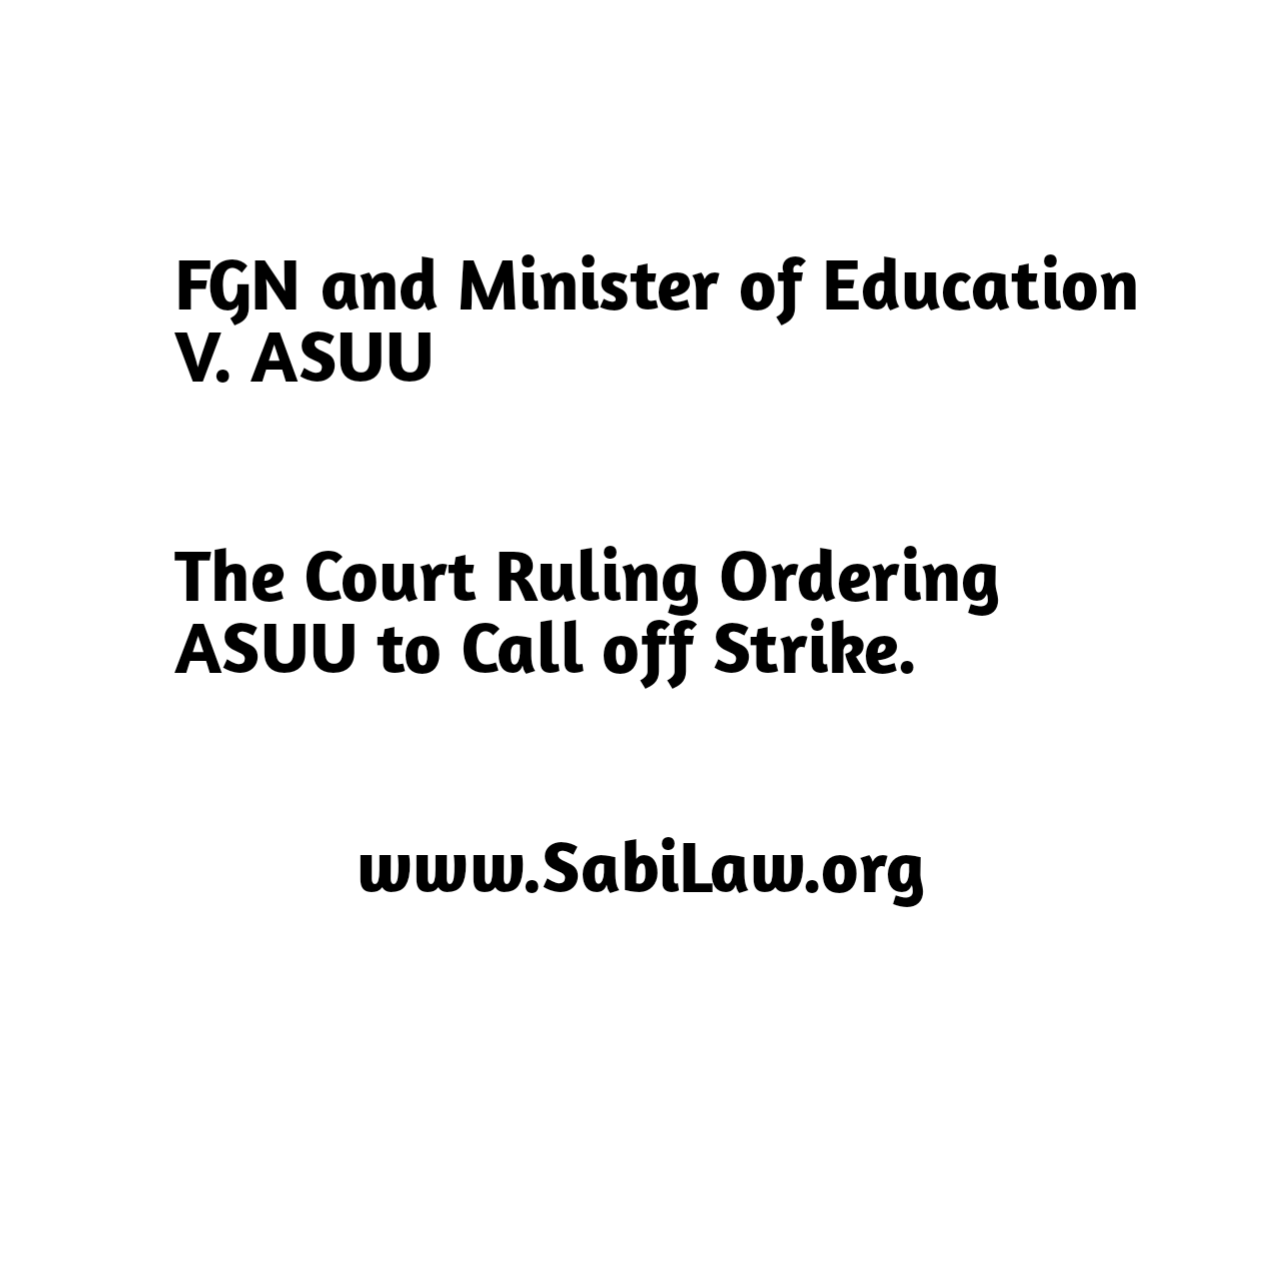 The Court Ruling Ordering ASUU to Call off Strike.